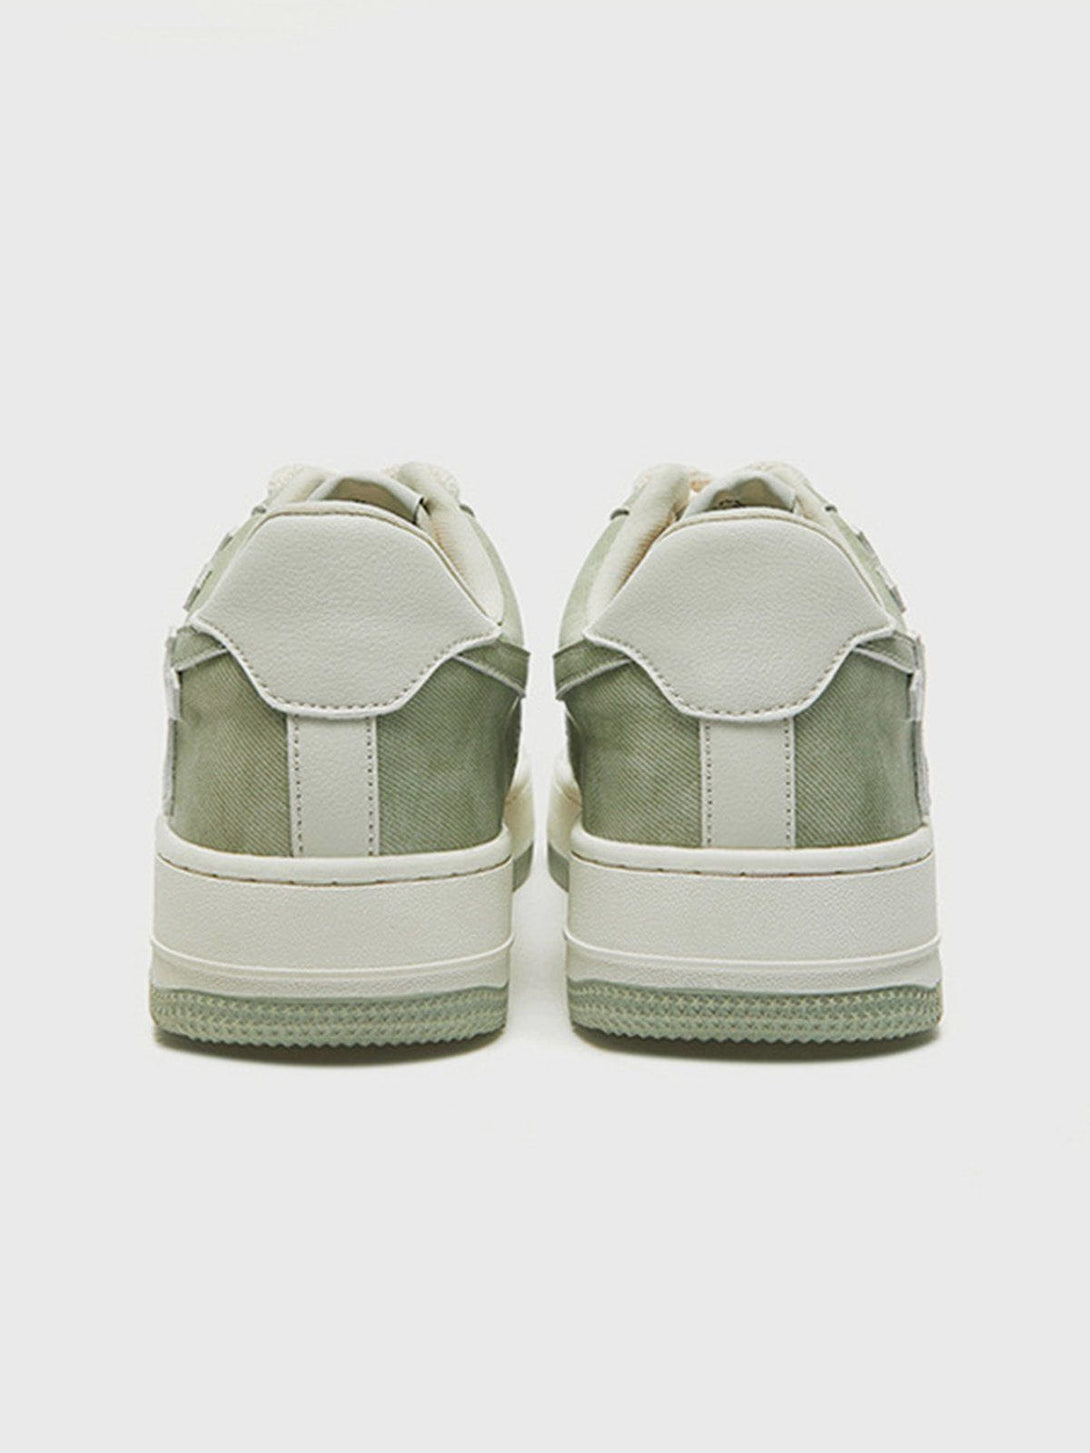 Levefly - Colorblock Cross Heart Casual Shoes - Streetwear Fashion - levefly.com